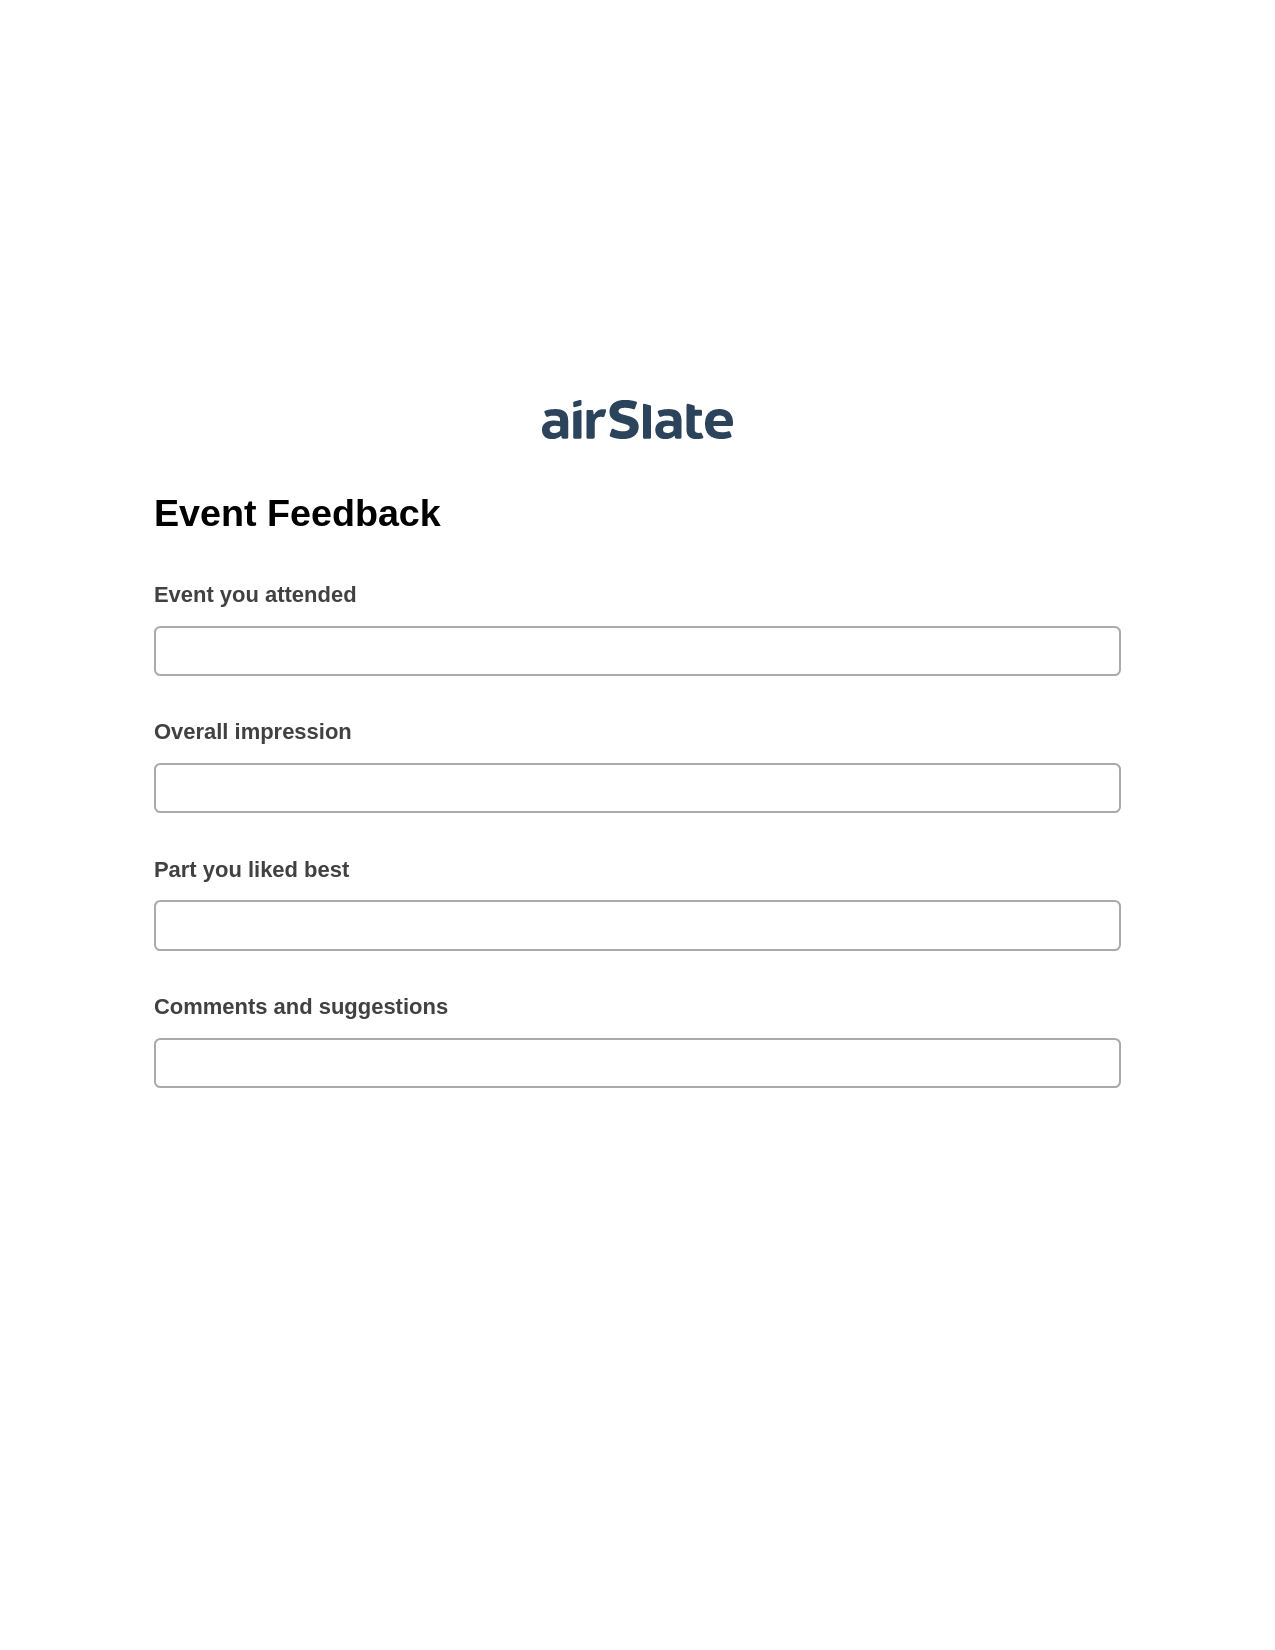 Event Feedback Pre-fill Dropdown from Airtable, Create MS Dynamics 365 Records Bot, Export to Smartsheet